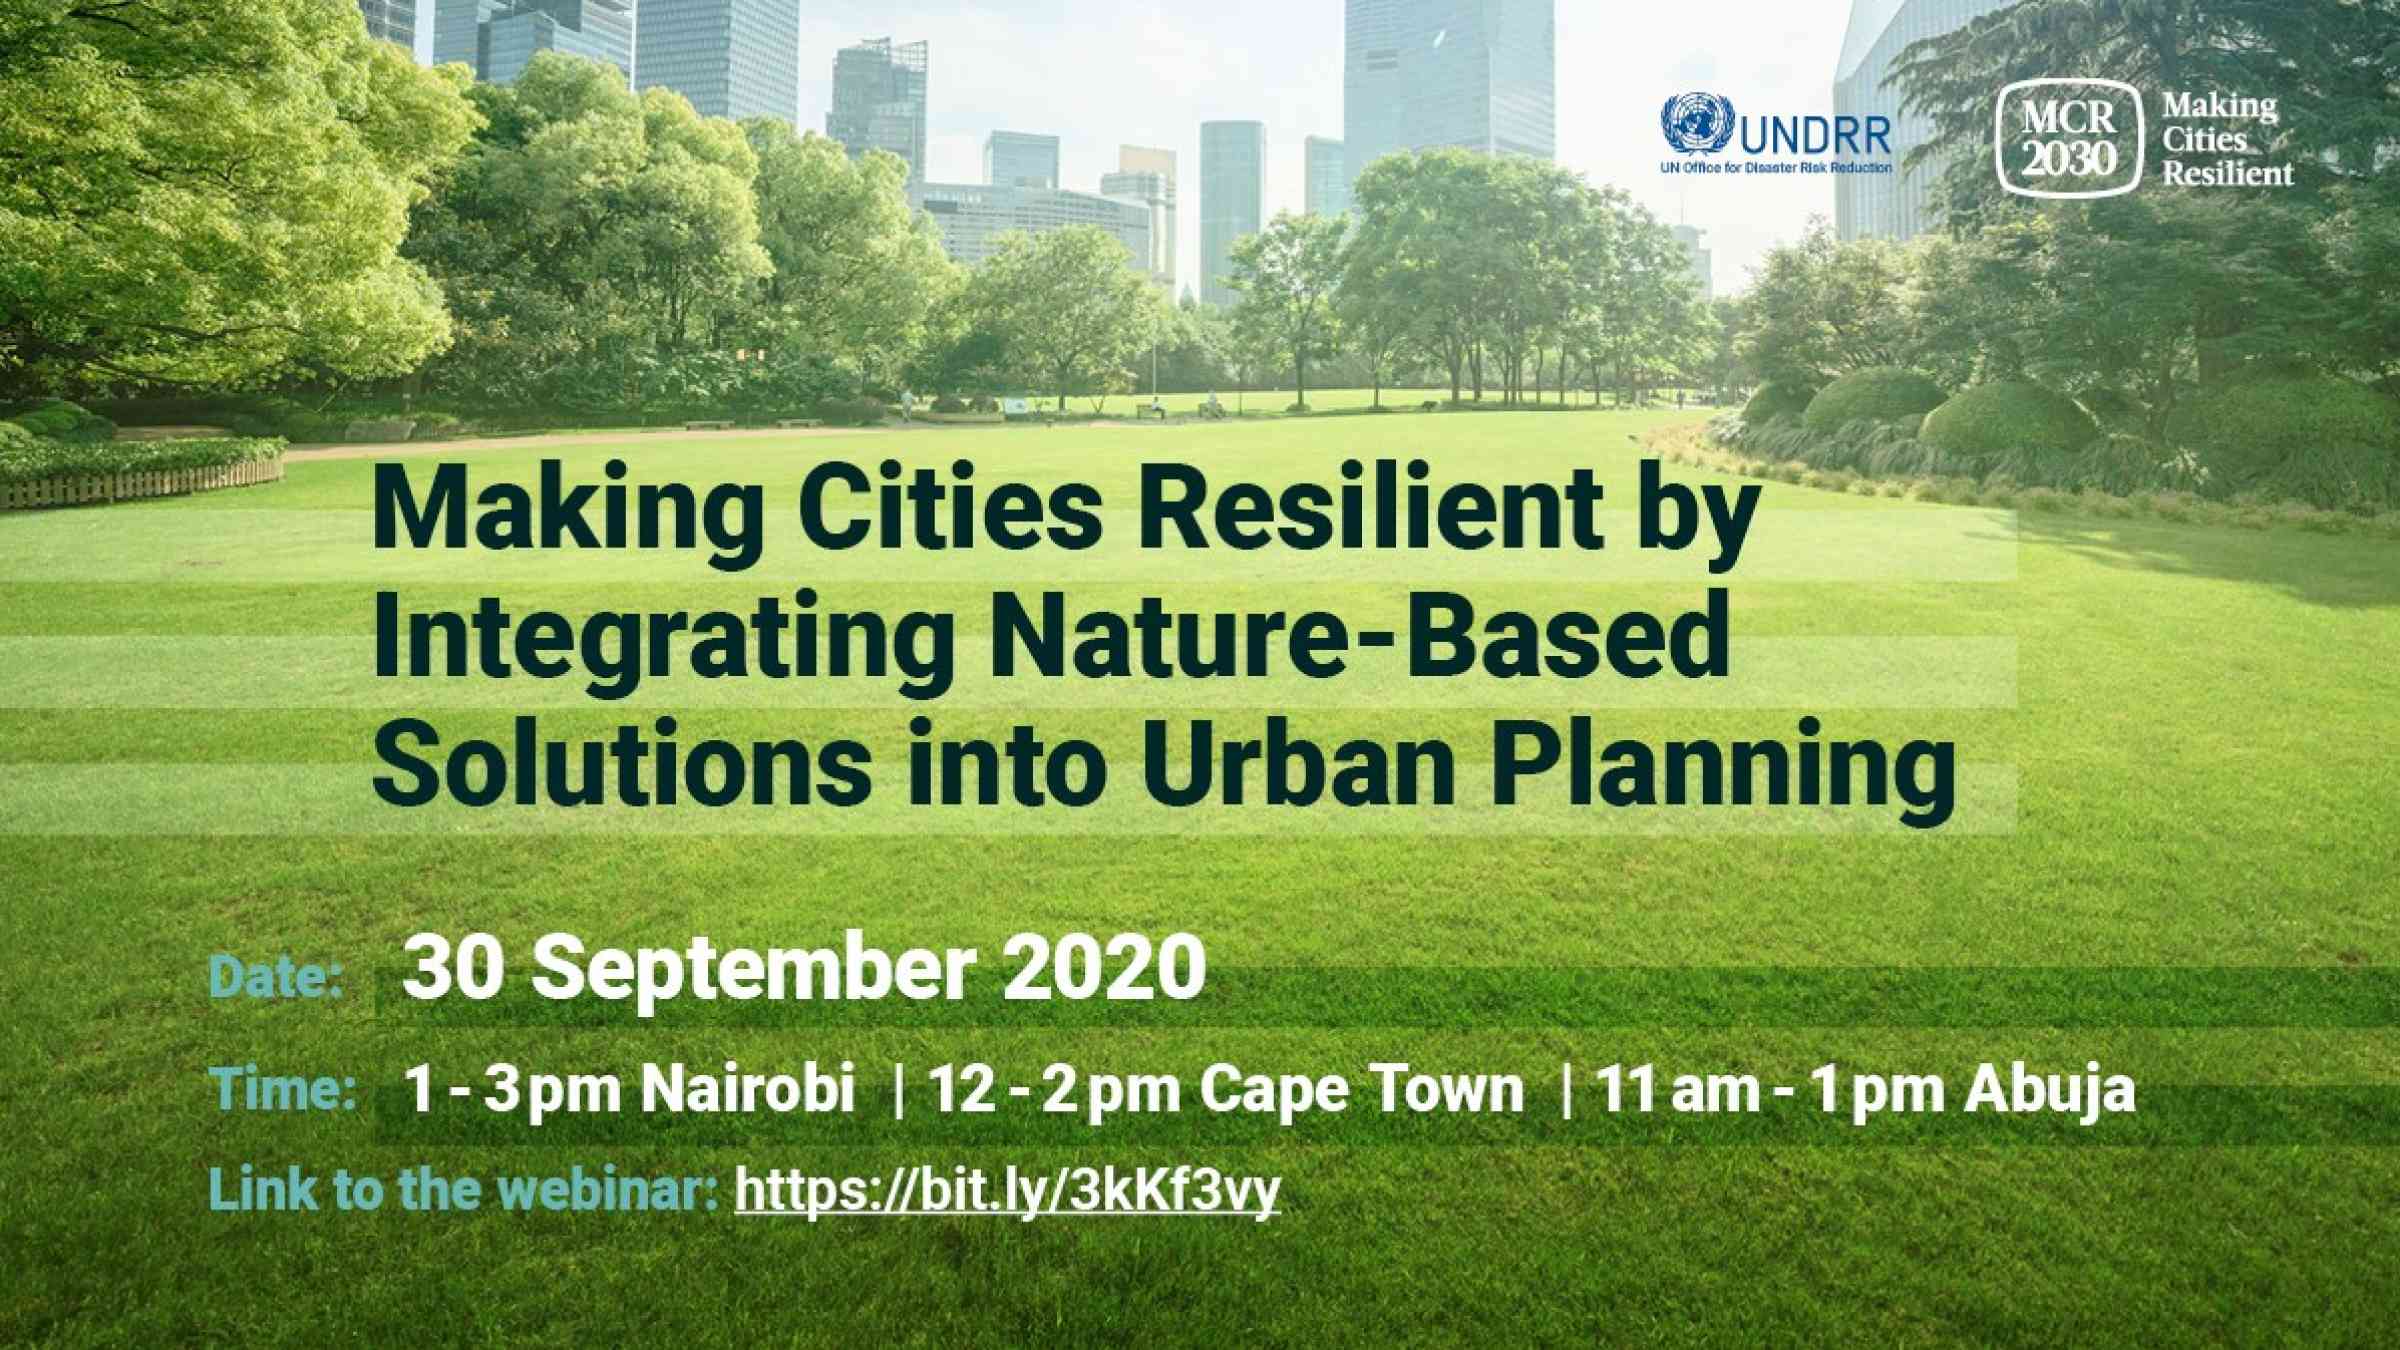 MCR nature based solutions for urban planning